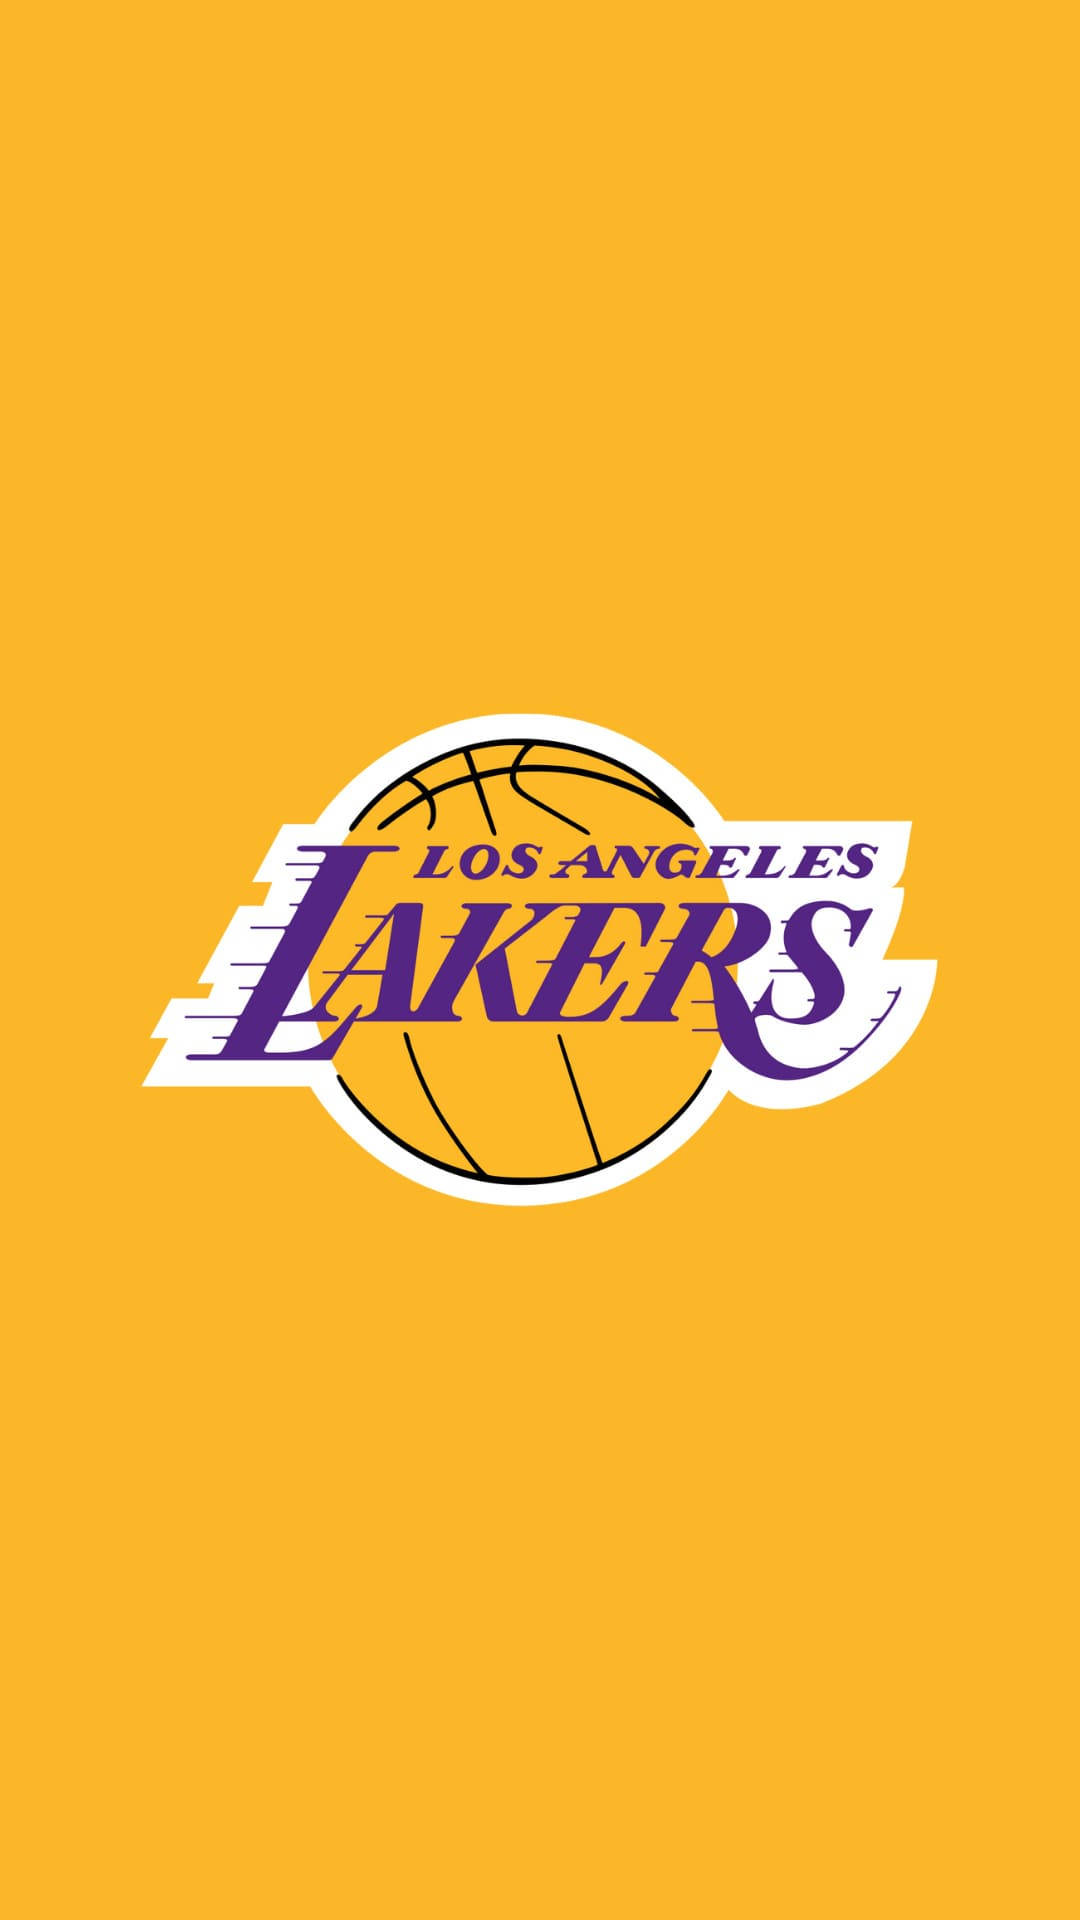 Embrace Laker Nation with this eye-catching Lakers Iphone wallpaper Wallpaper